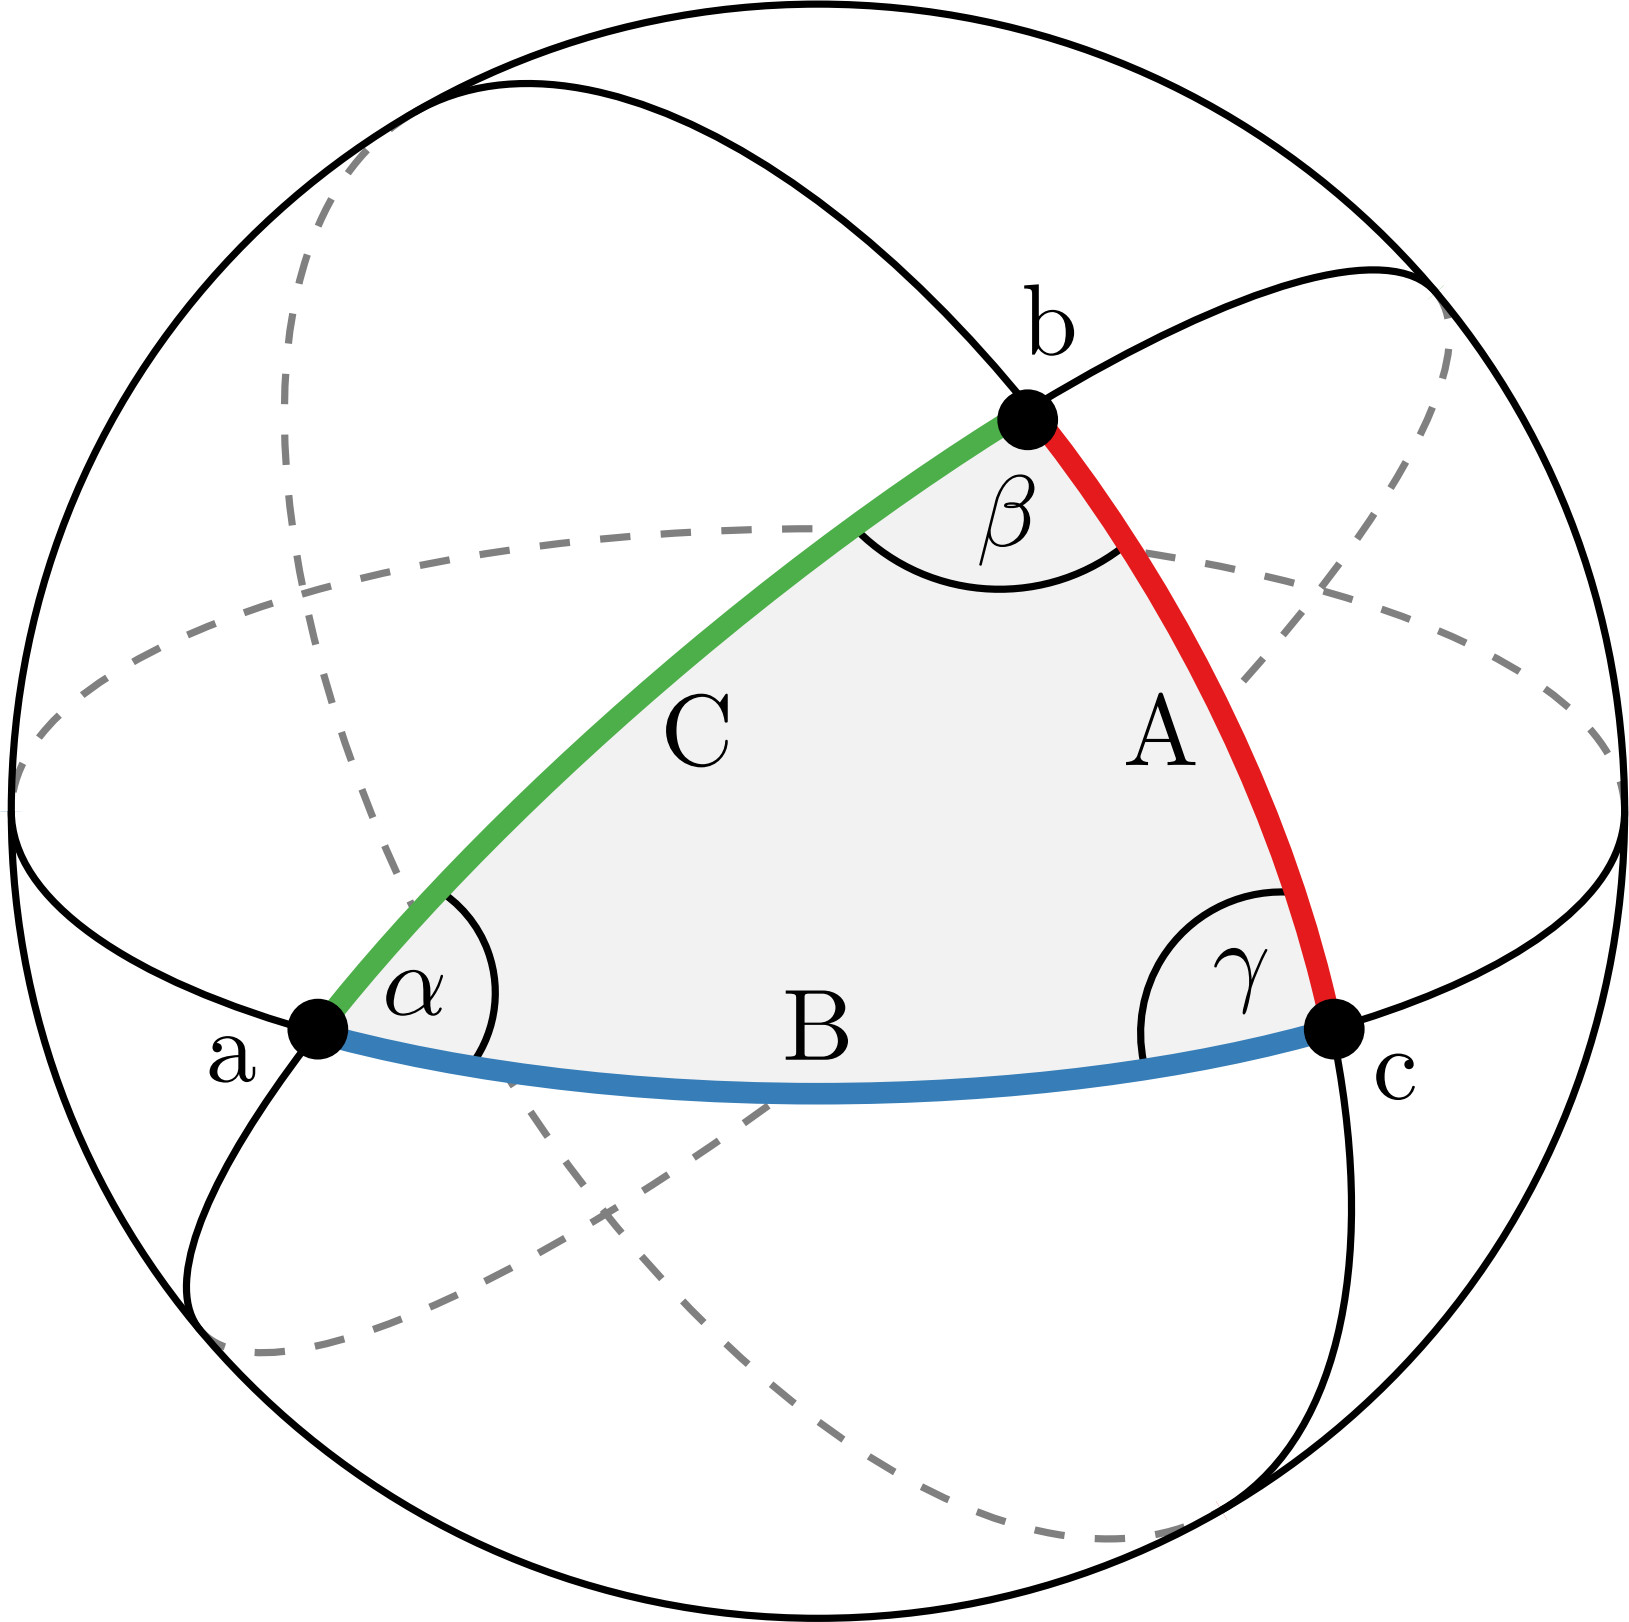 Computation of the spherical excess.